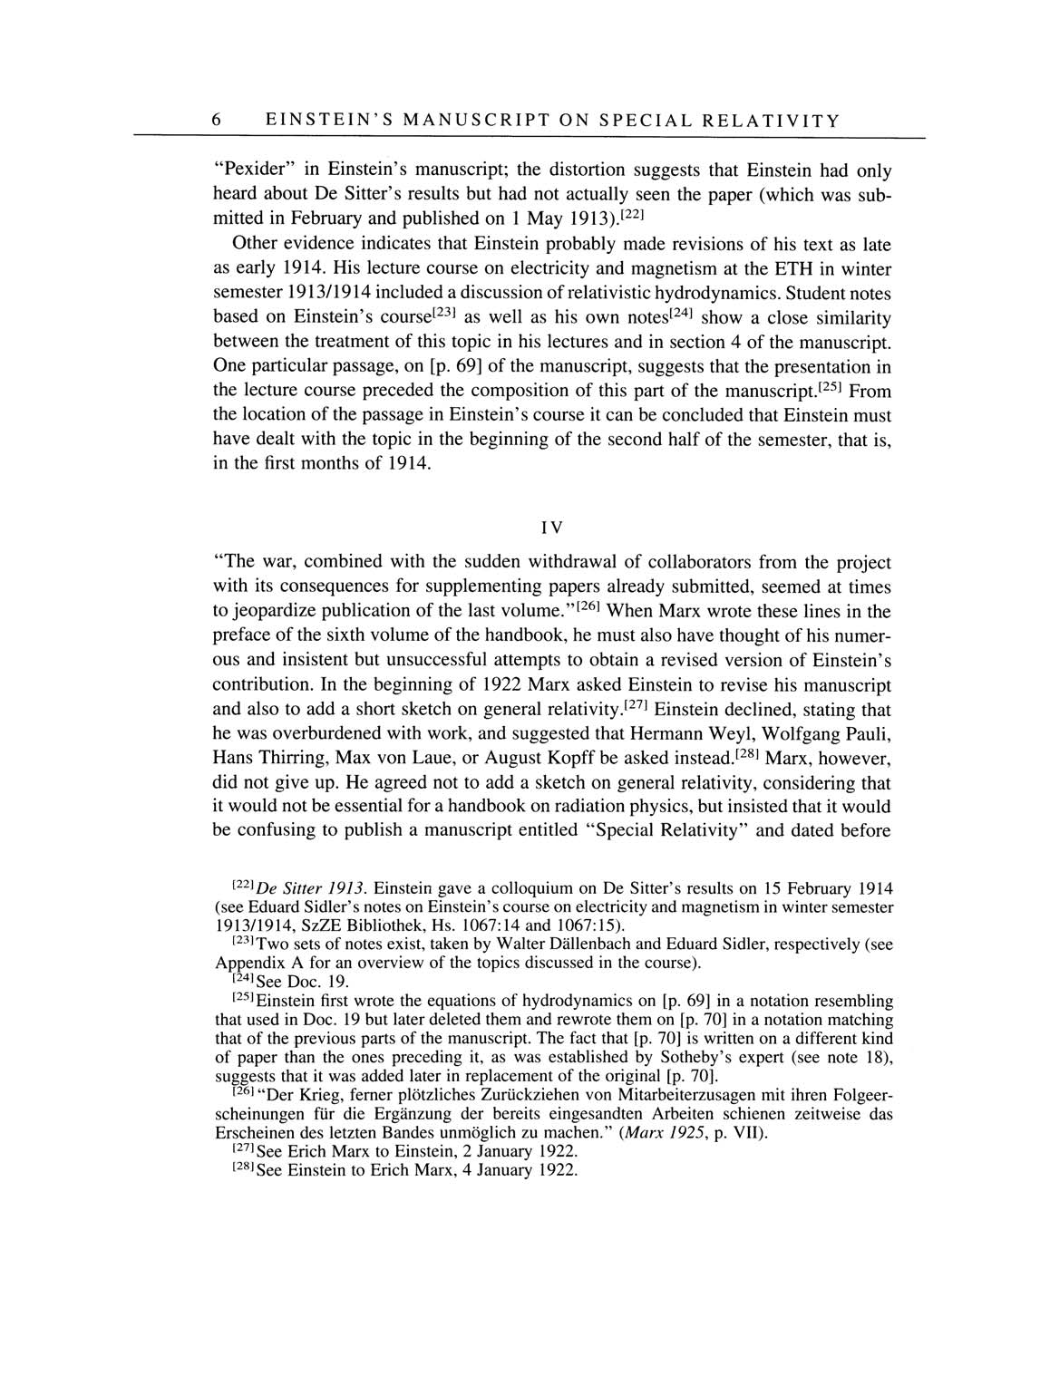 Volume 4: The Swiss Years: Writings 1912-1914 page 6